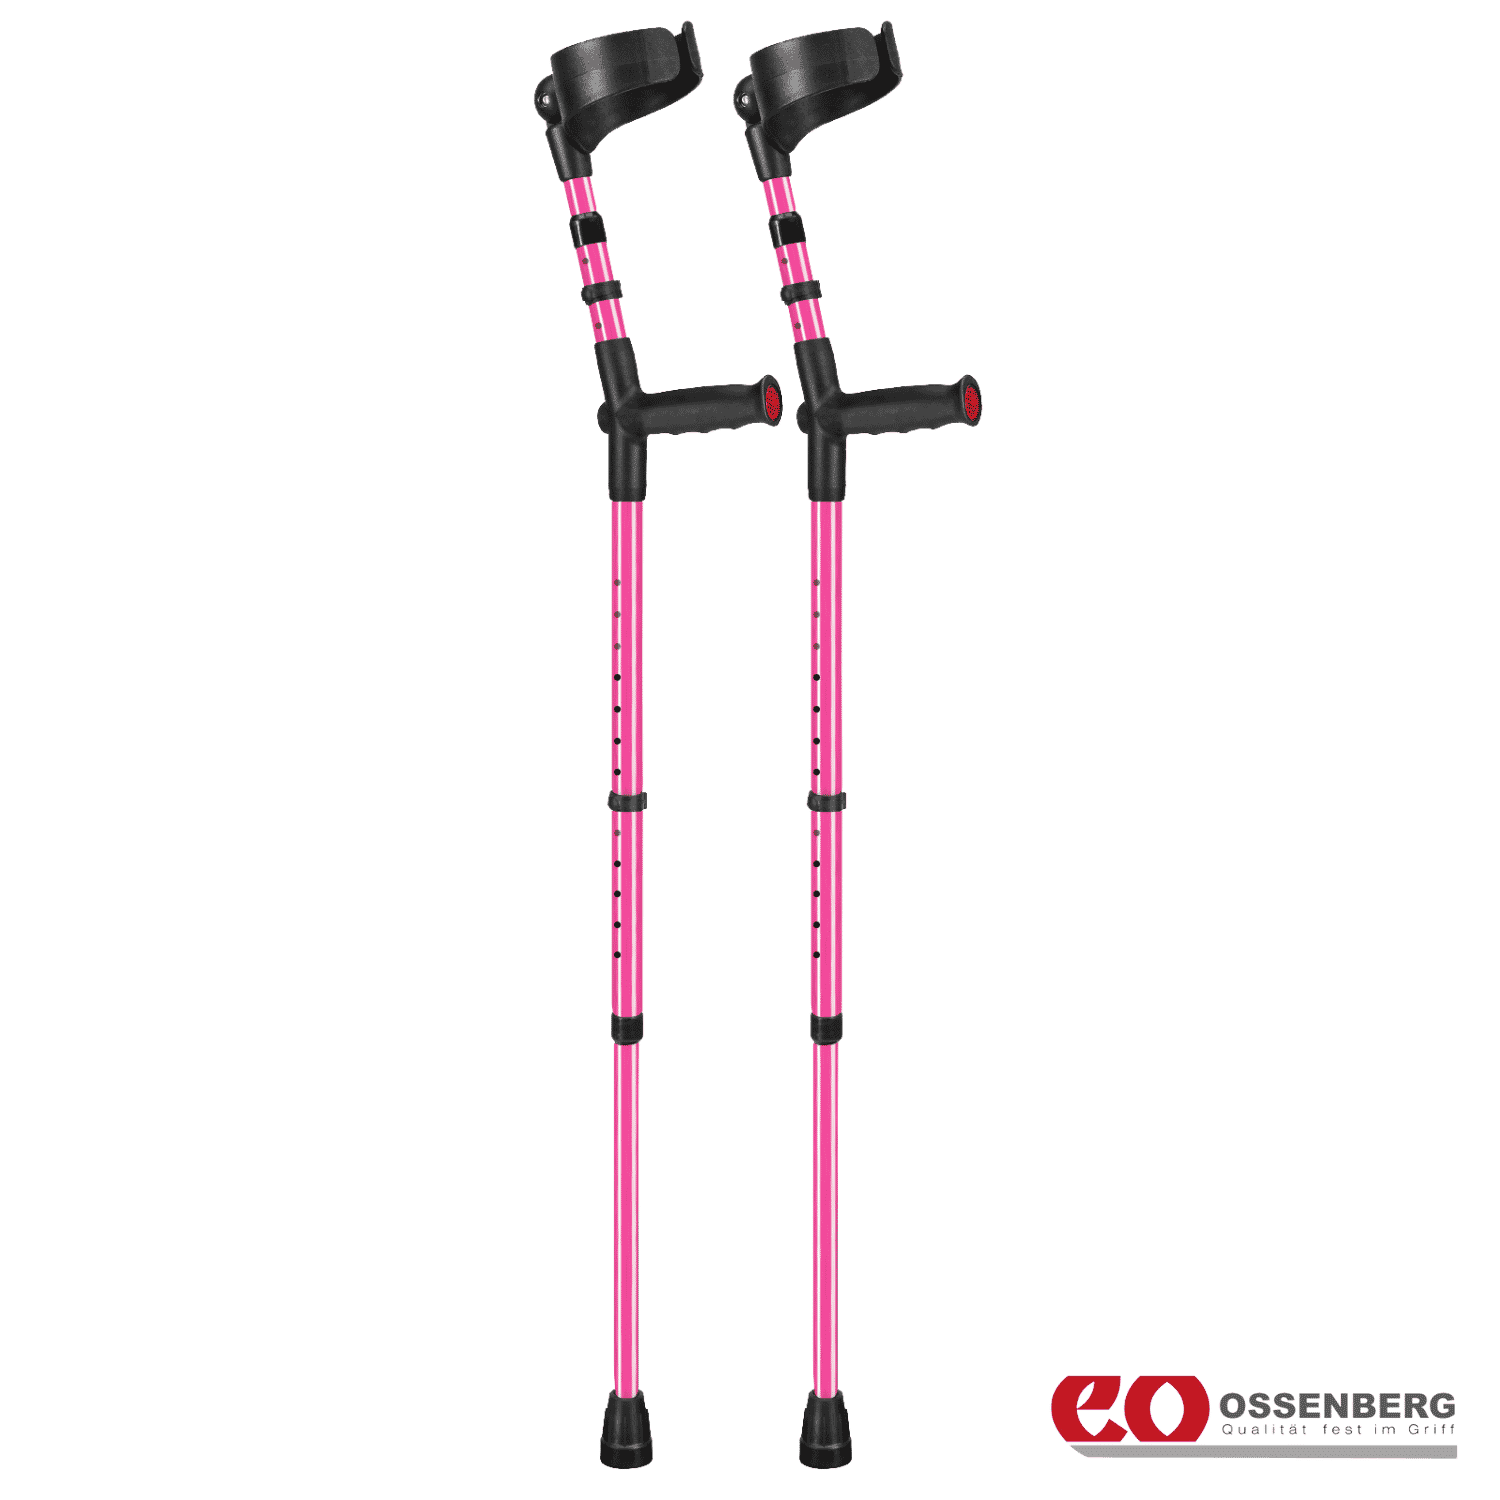 View Ossenberg Soft Grip Double Adjustable Crutches Pink Pair information